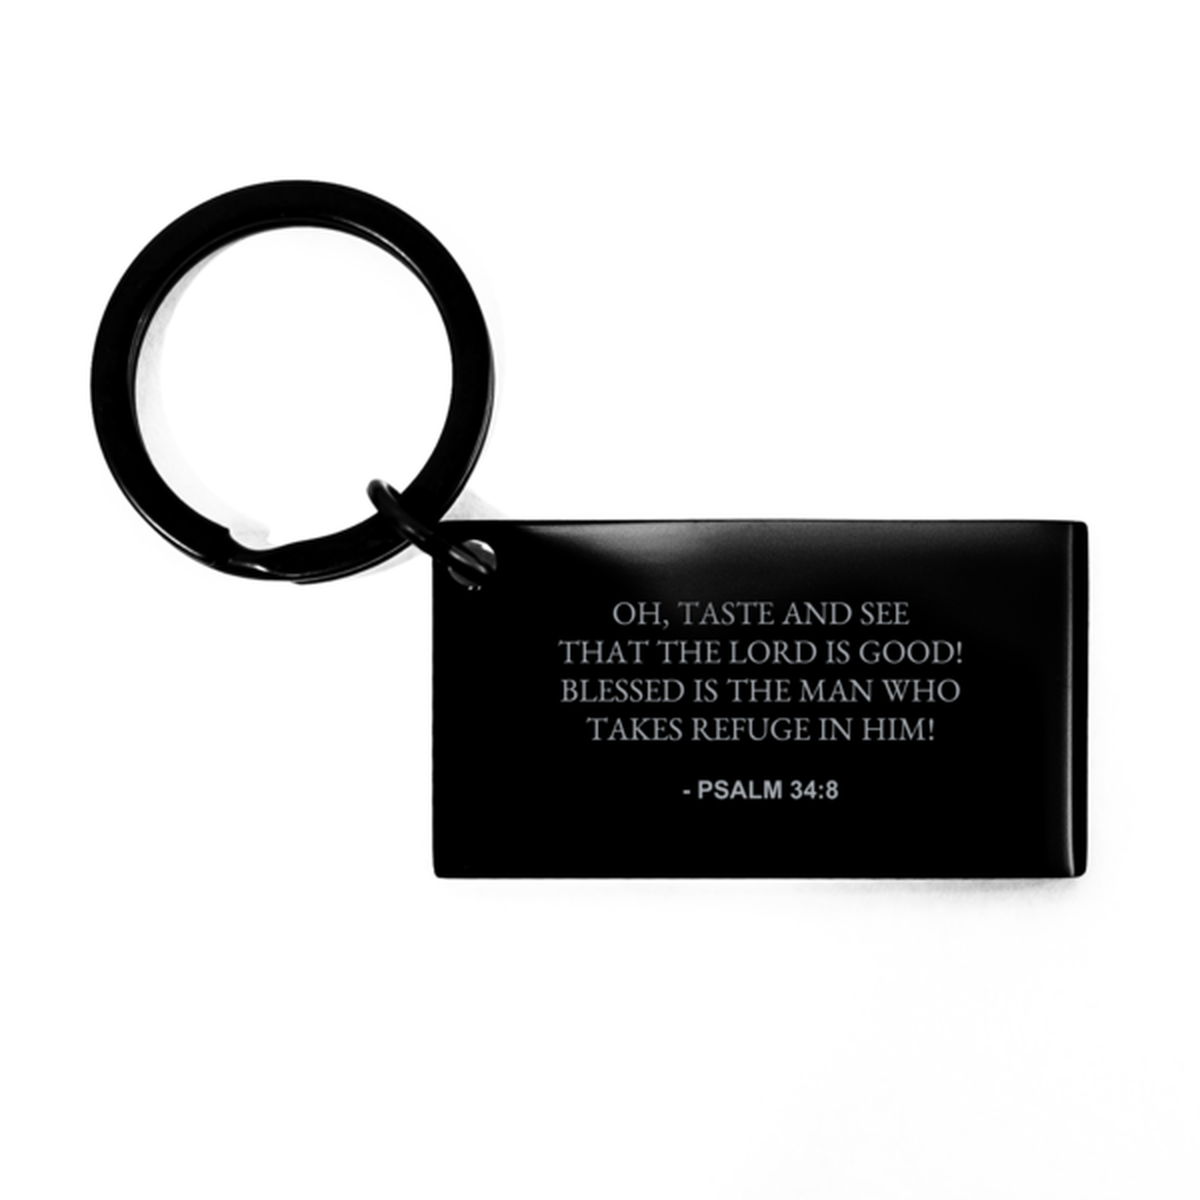 Bible Verse Black Keychain, Psalm 34:8 Oh, Taste And See That The Lord Is Good! Blessed, Christian Inspirational Key Ring Gifts For Men Women